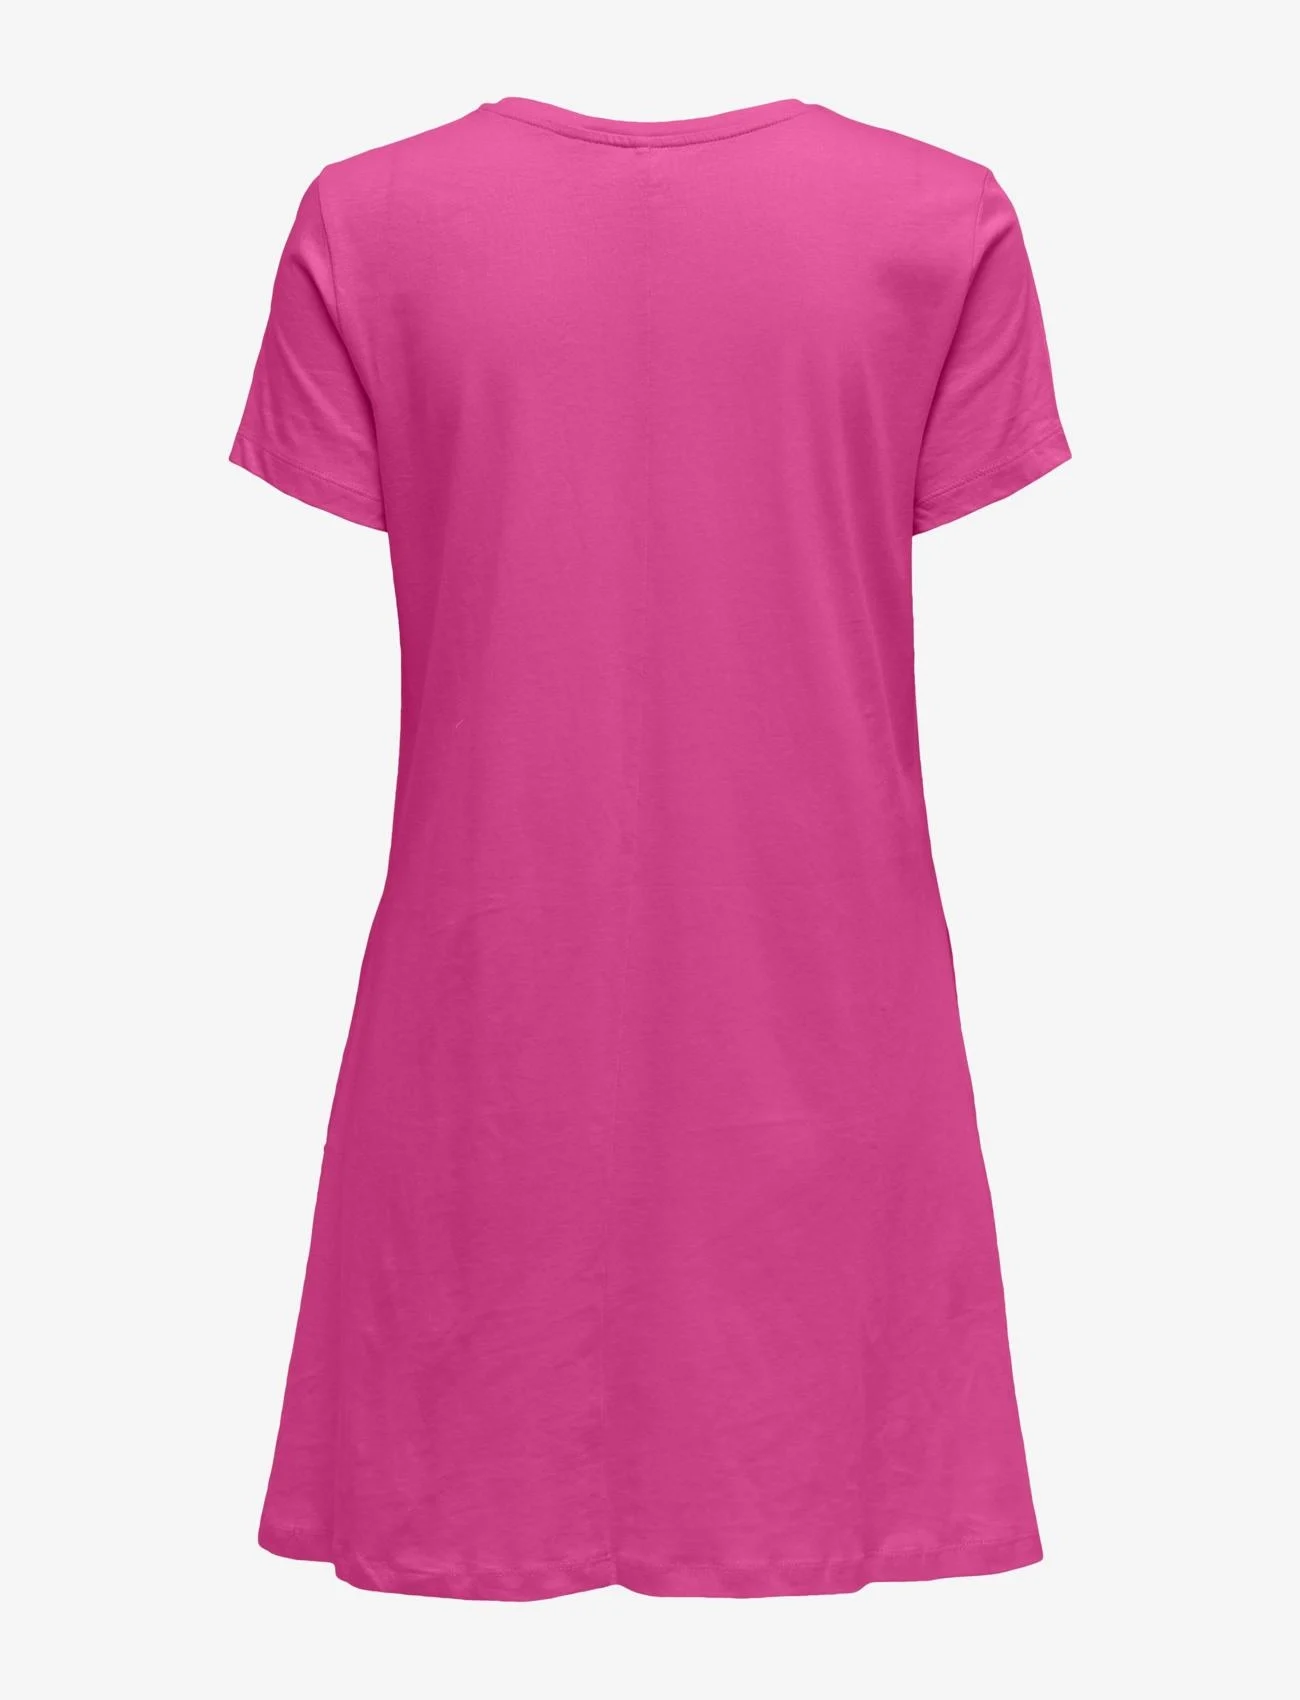 ONLY - ONLMAY LIFE S/S POCKET DRESS JRS - lowest prices - raspberry rose - 1